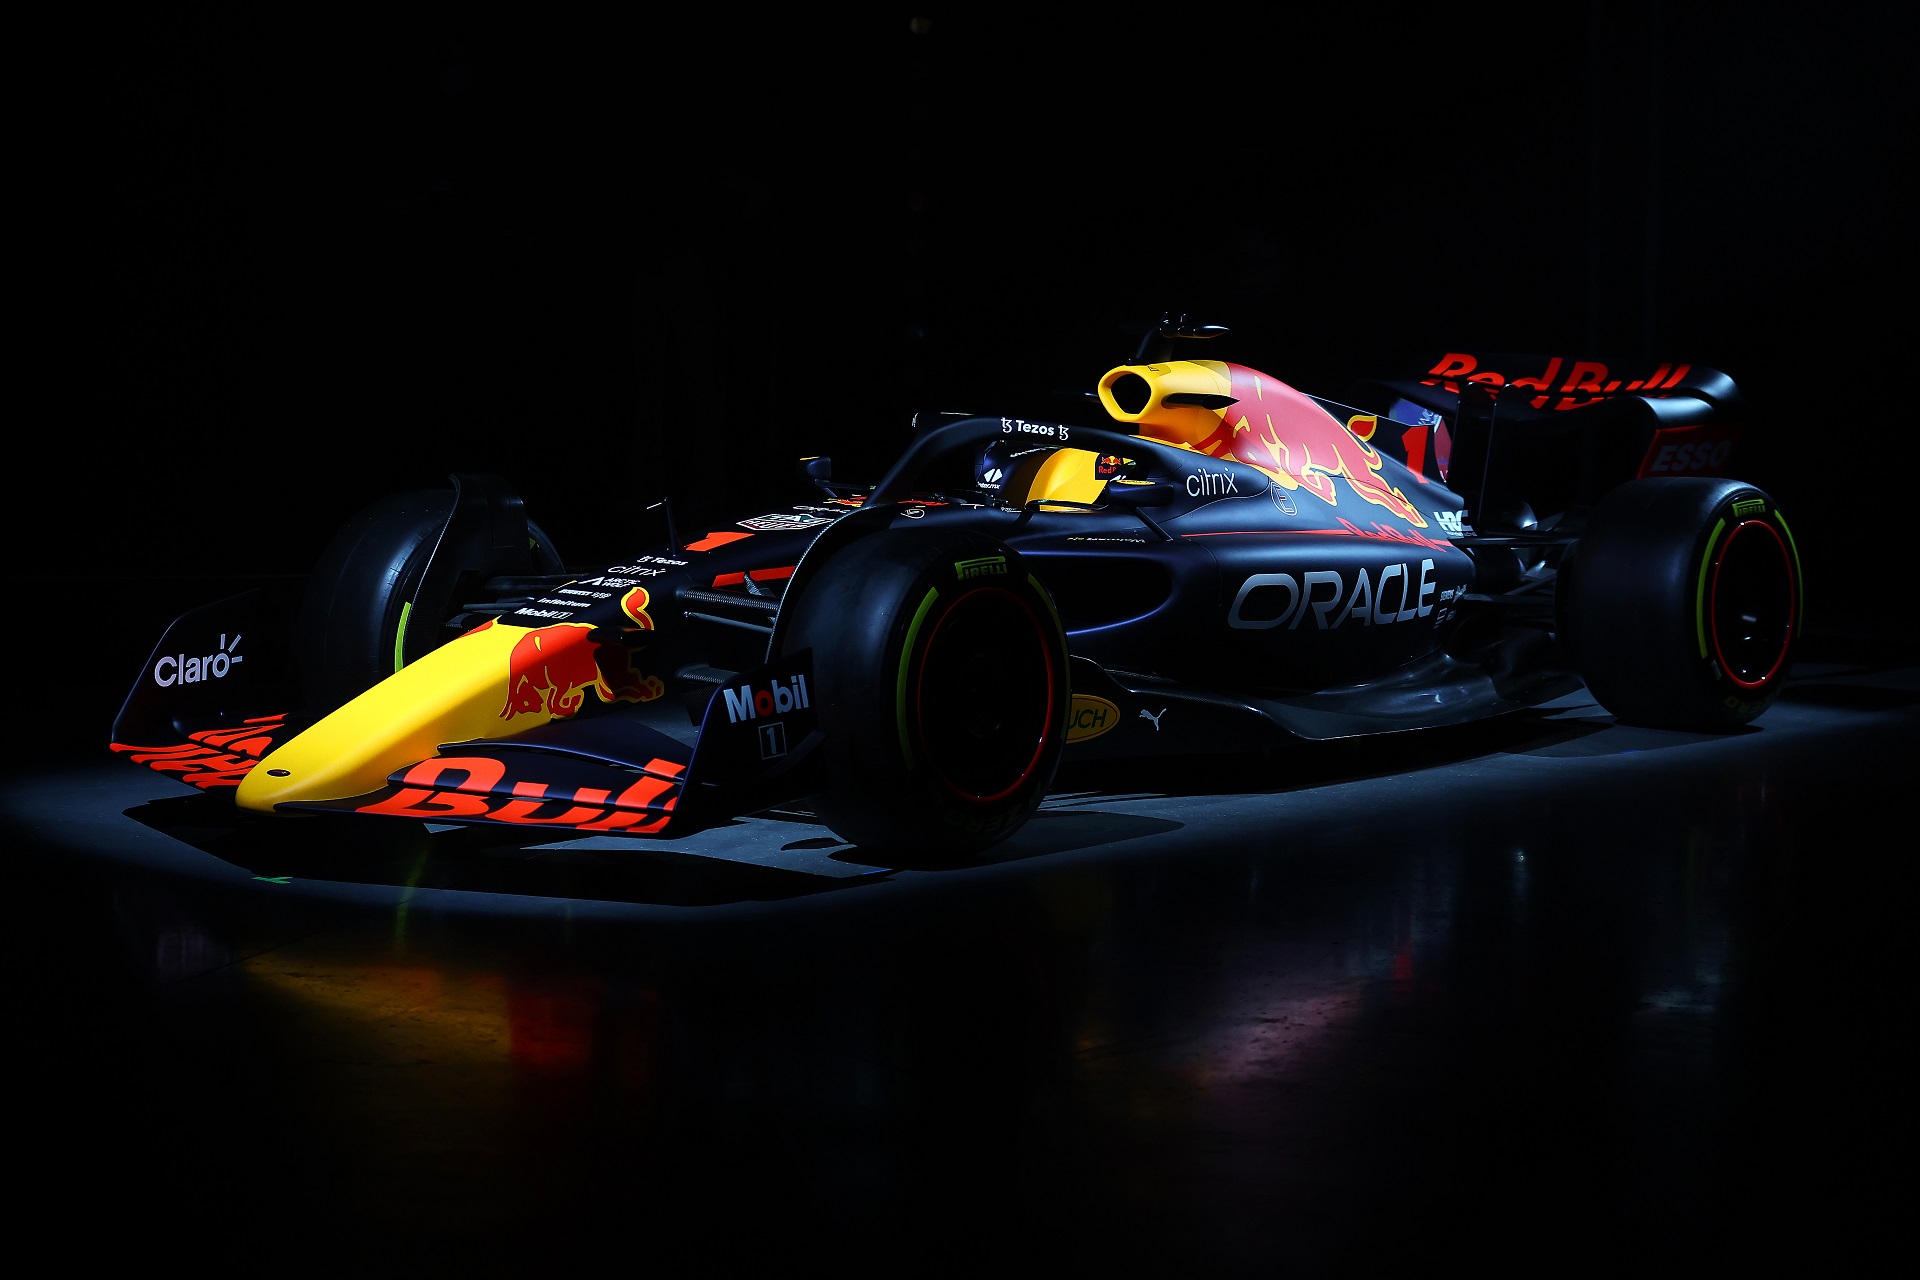 5.7m fans tune in to Oracle Red Bull Racing launch livestream Mobile Marketing Magazine